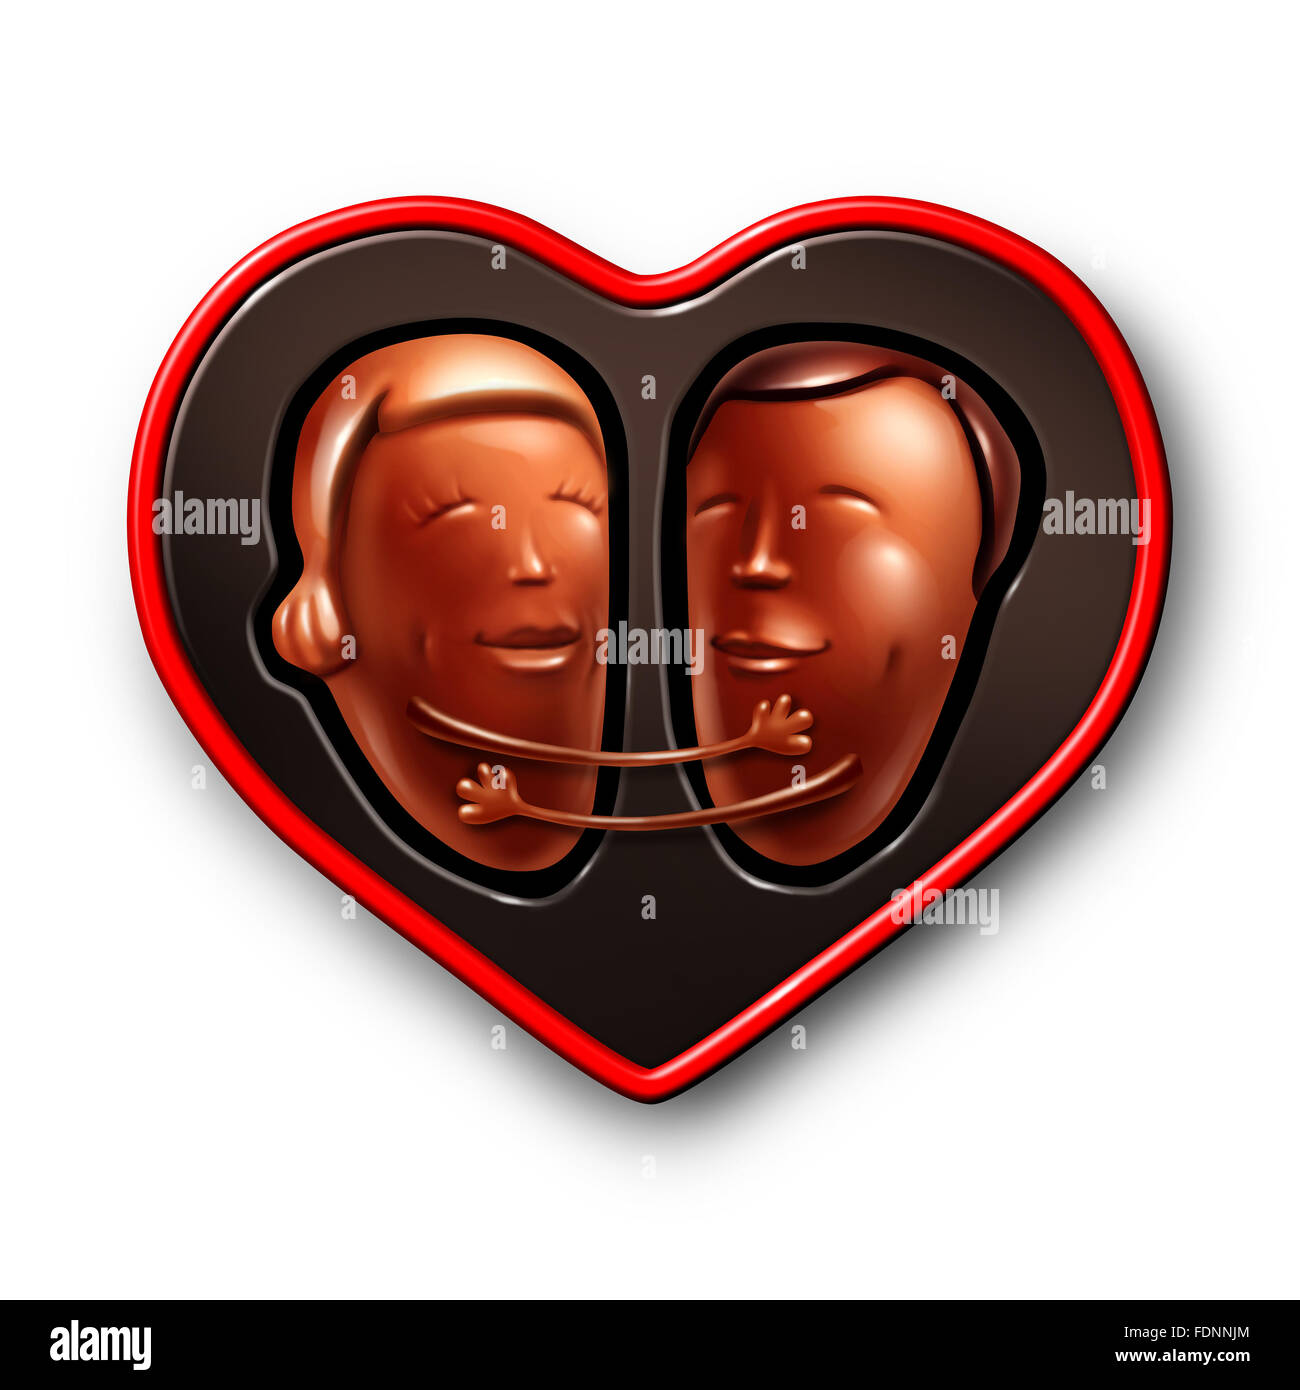 Happy couple in love concept as two lovers made of chocolate candy in a valentines day gift box embracing and hugging together as a relationship symbol and a cute valentine icon. Stock Photo